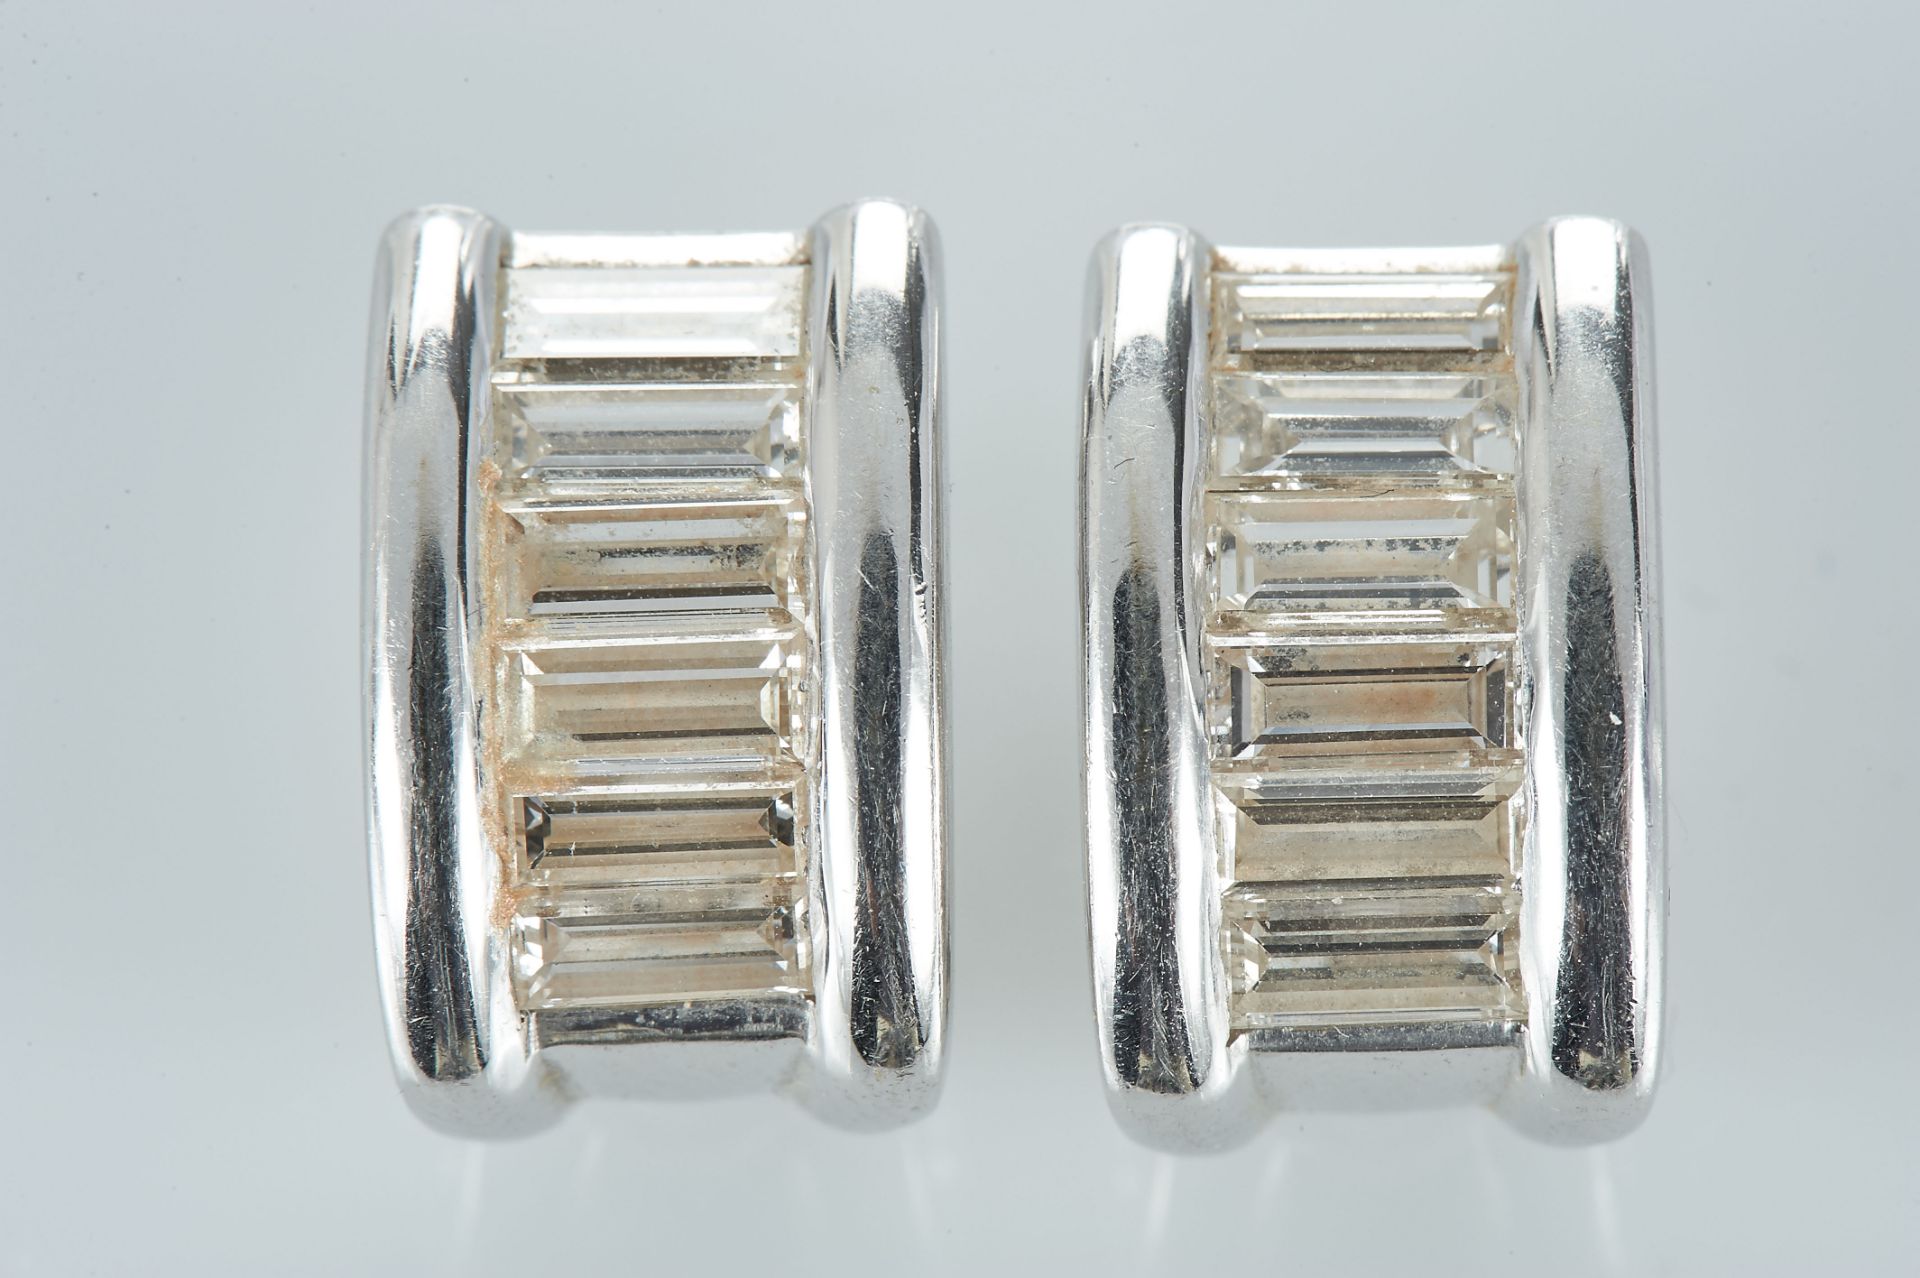 A Pair of Earrings, 800/1000 gold, set with 12 baguette cut diamonds with the approximate weight